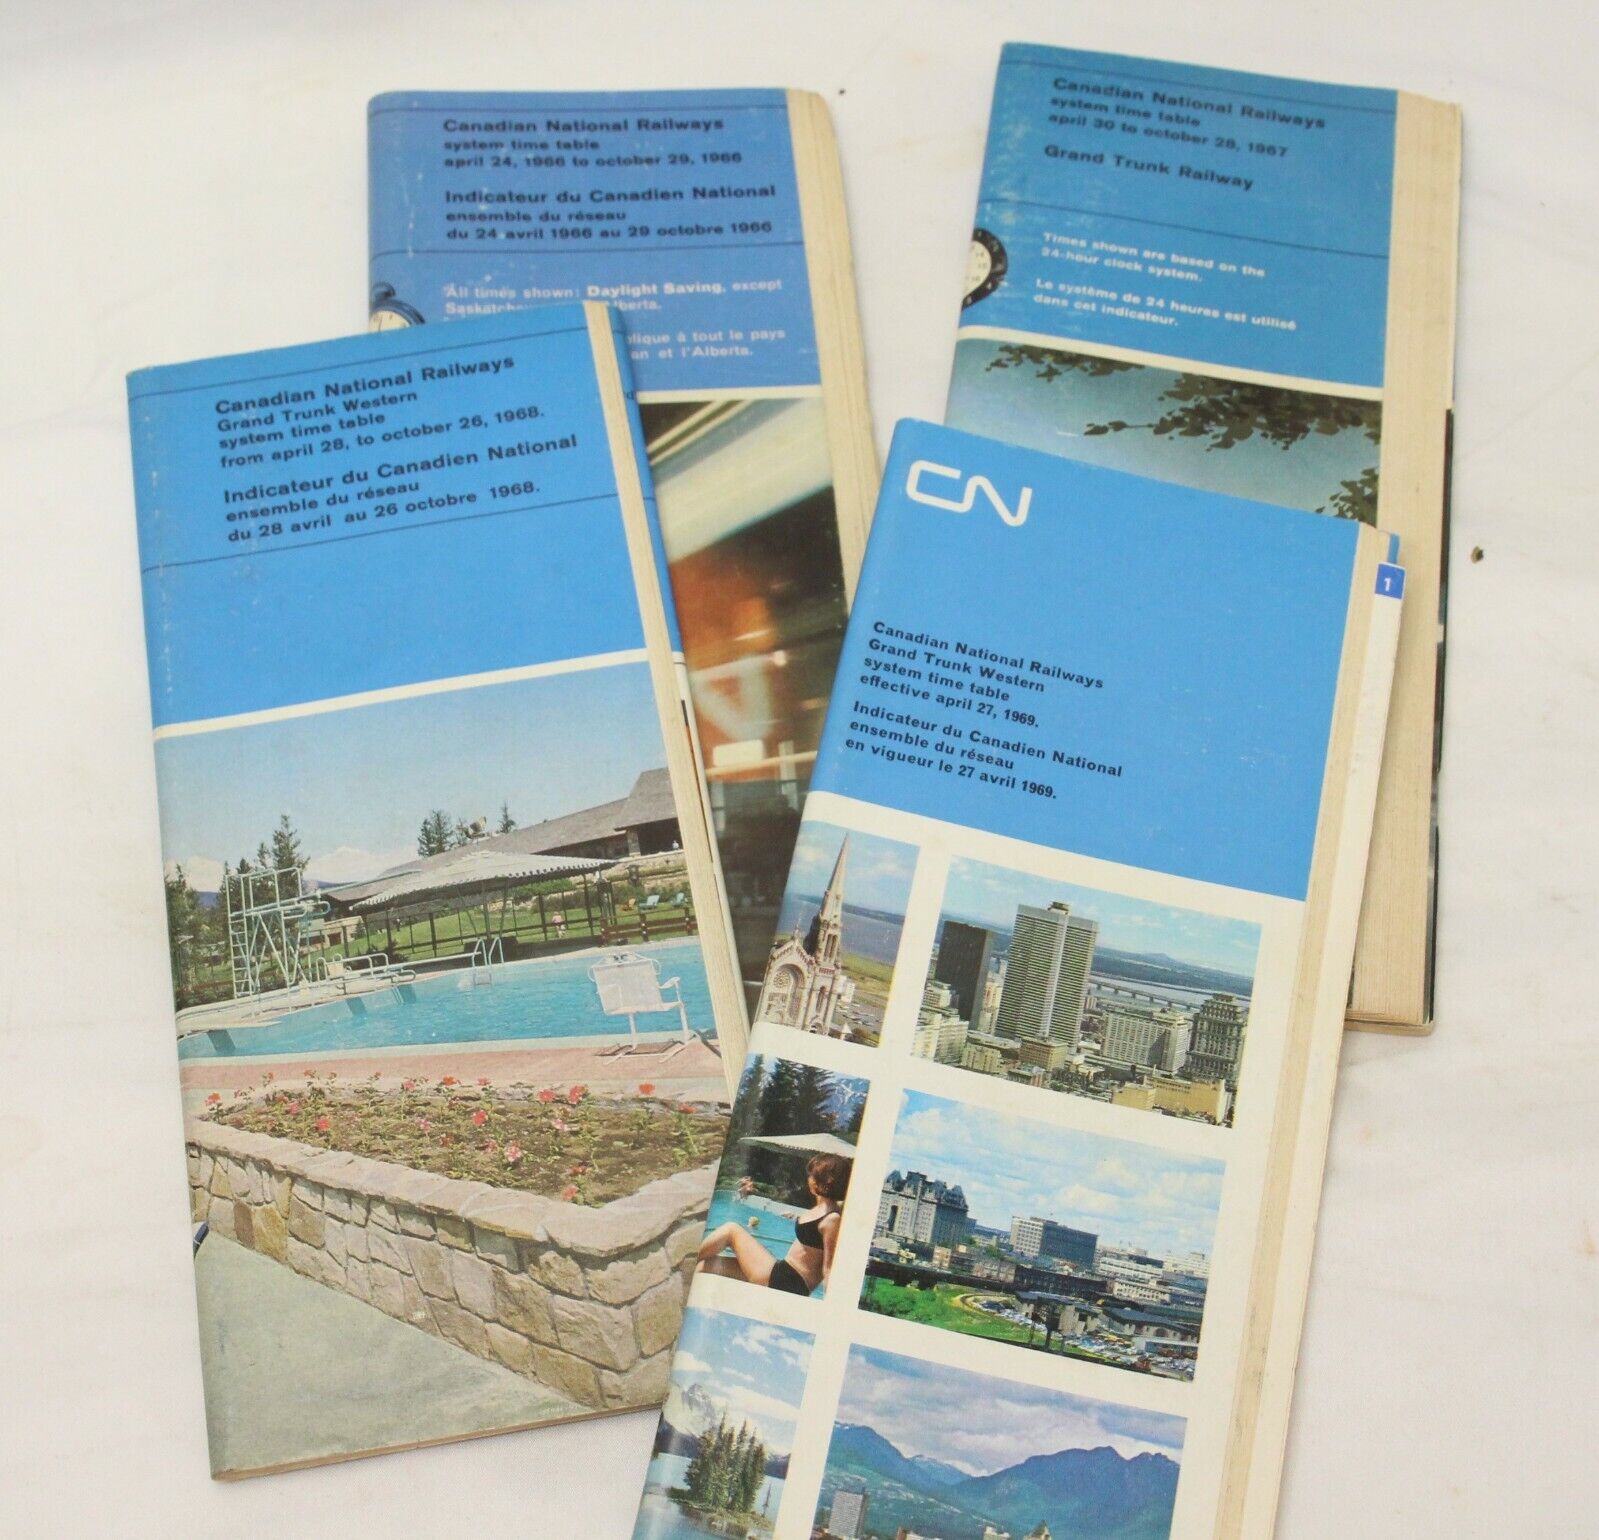 4 CN Canadian National Railways Time Table 1966 - 1969 Grand ...